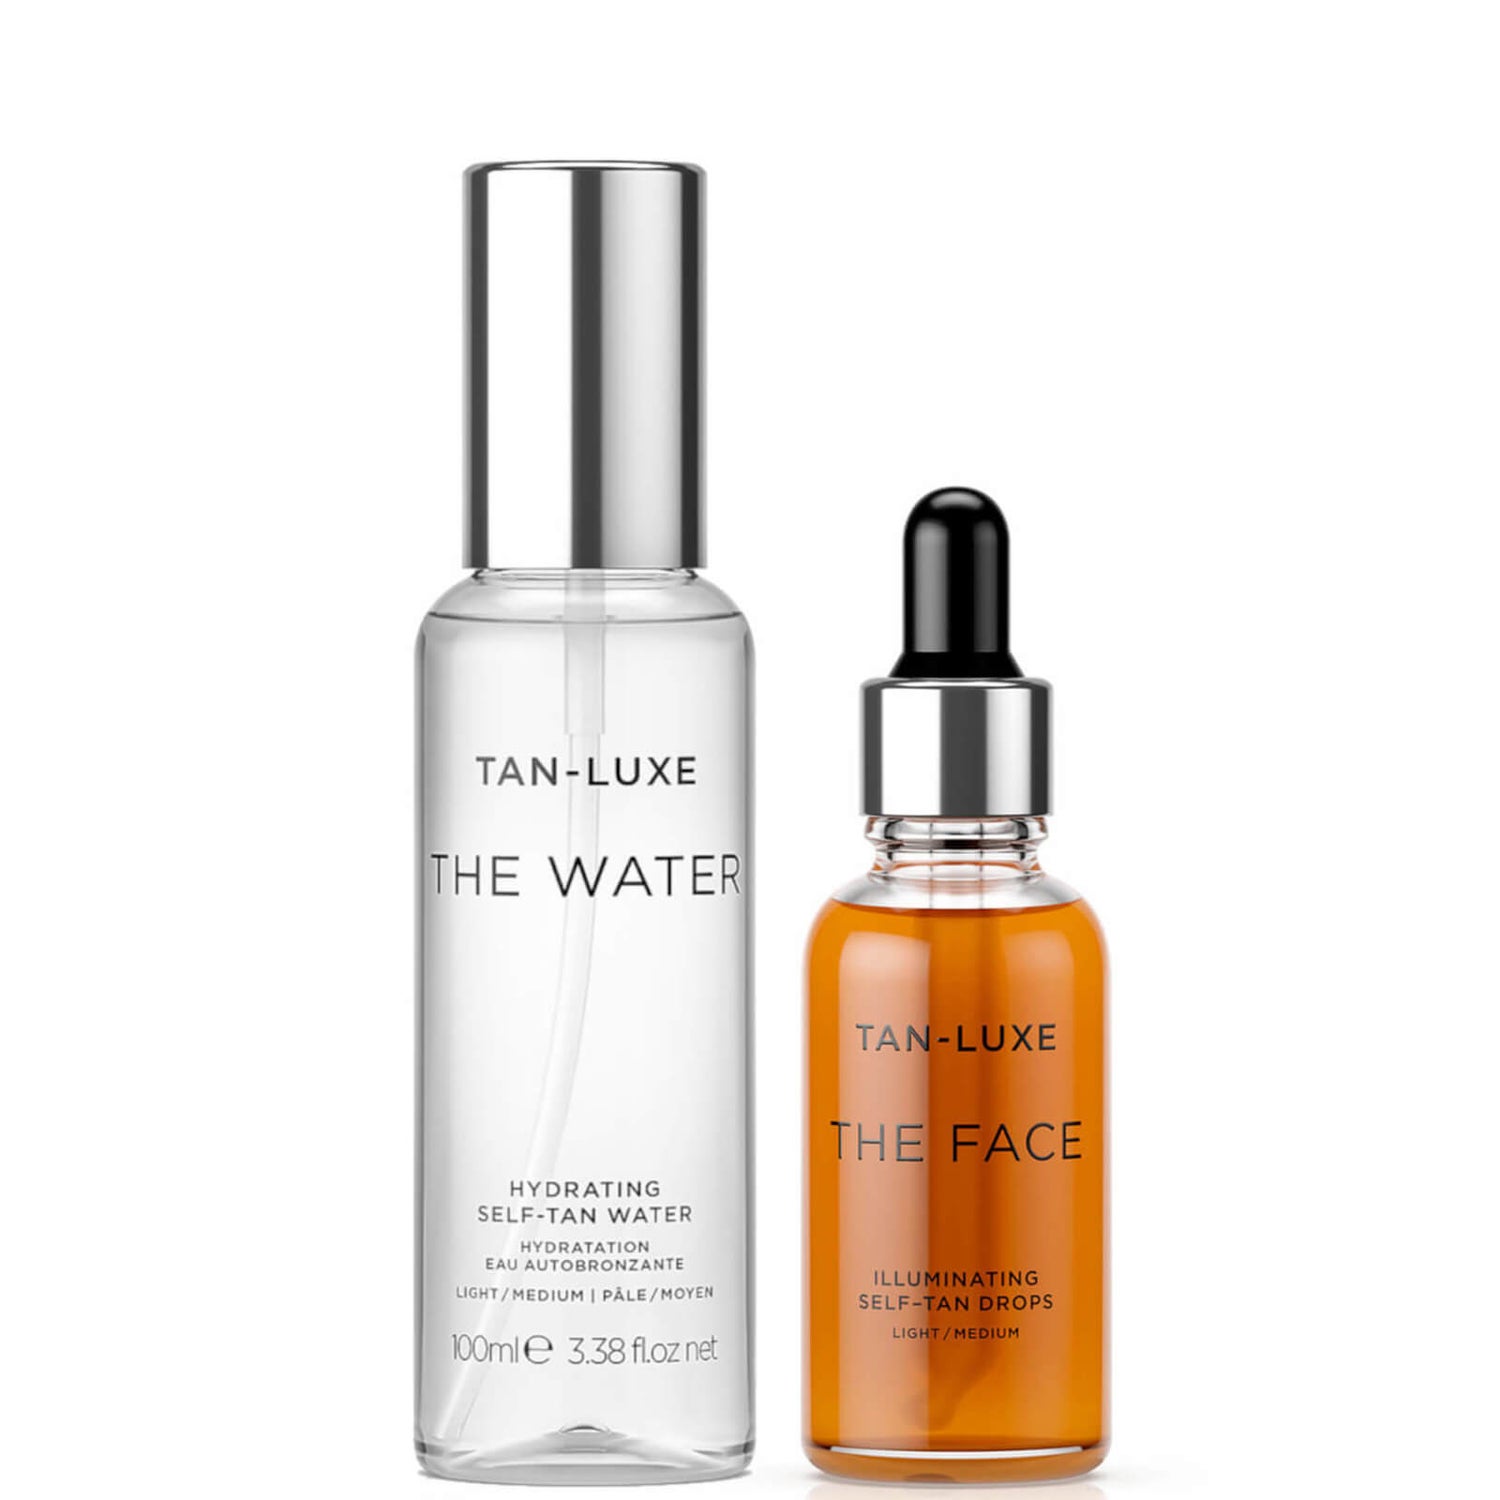 Tan-Luxe Travel Size The Face and The Water Bundle - Light-Medium